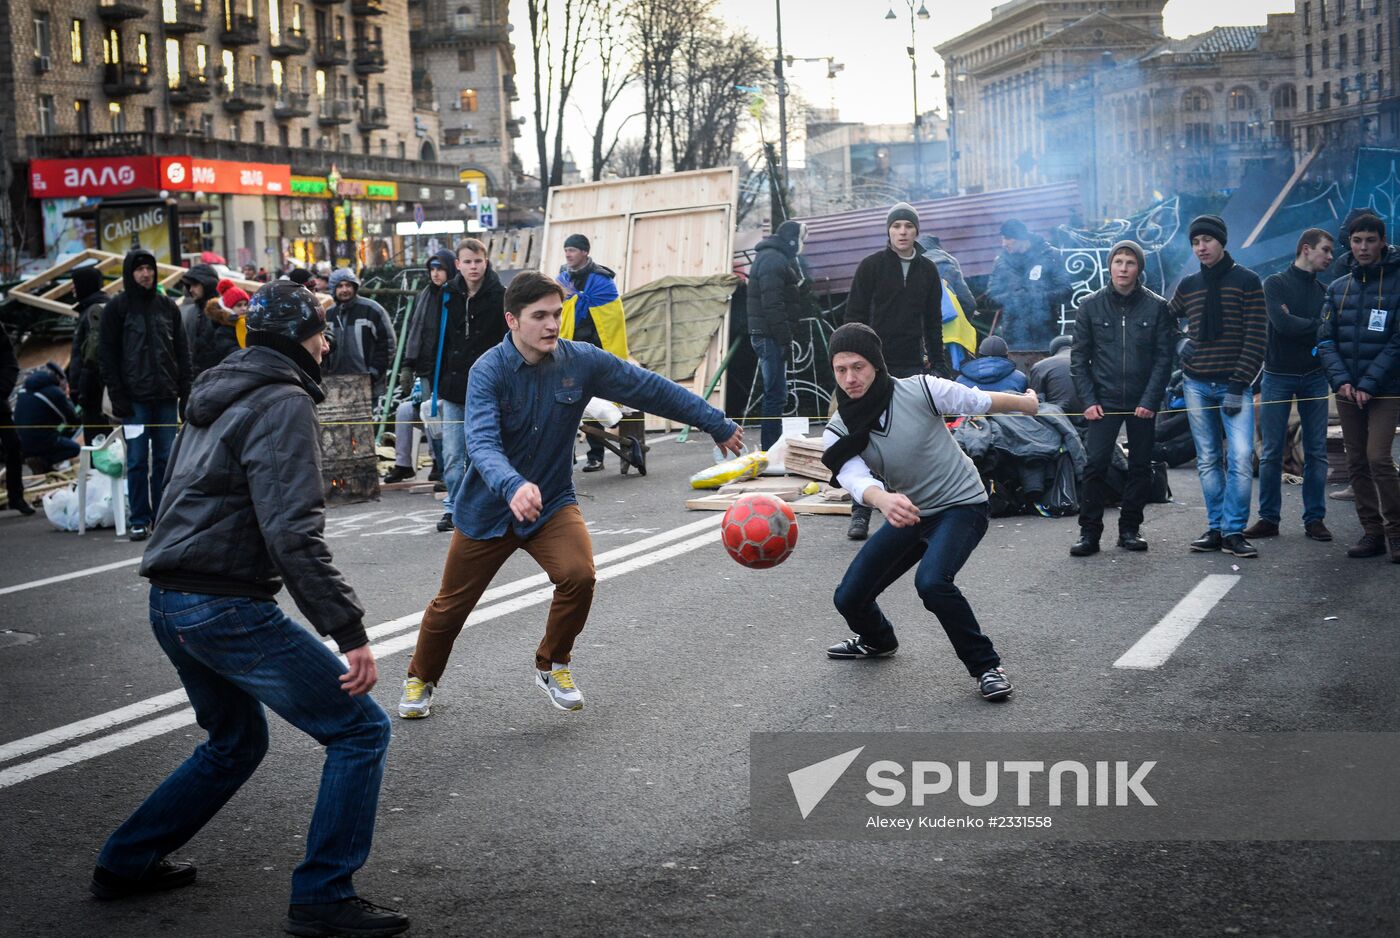 EU supporters' action on Independence Square in Kiev